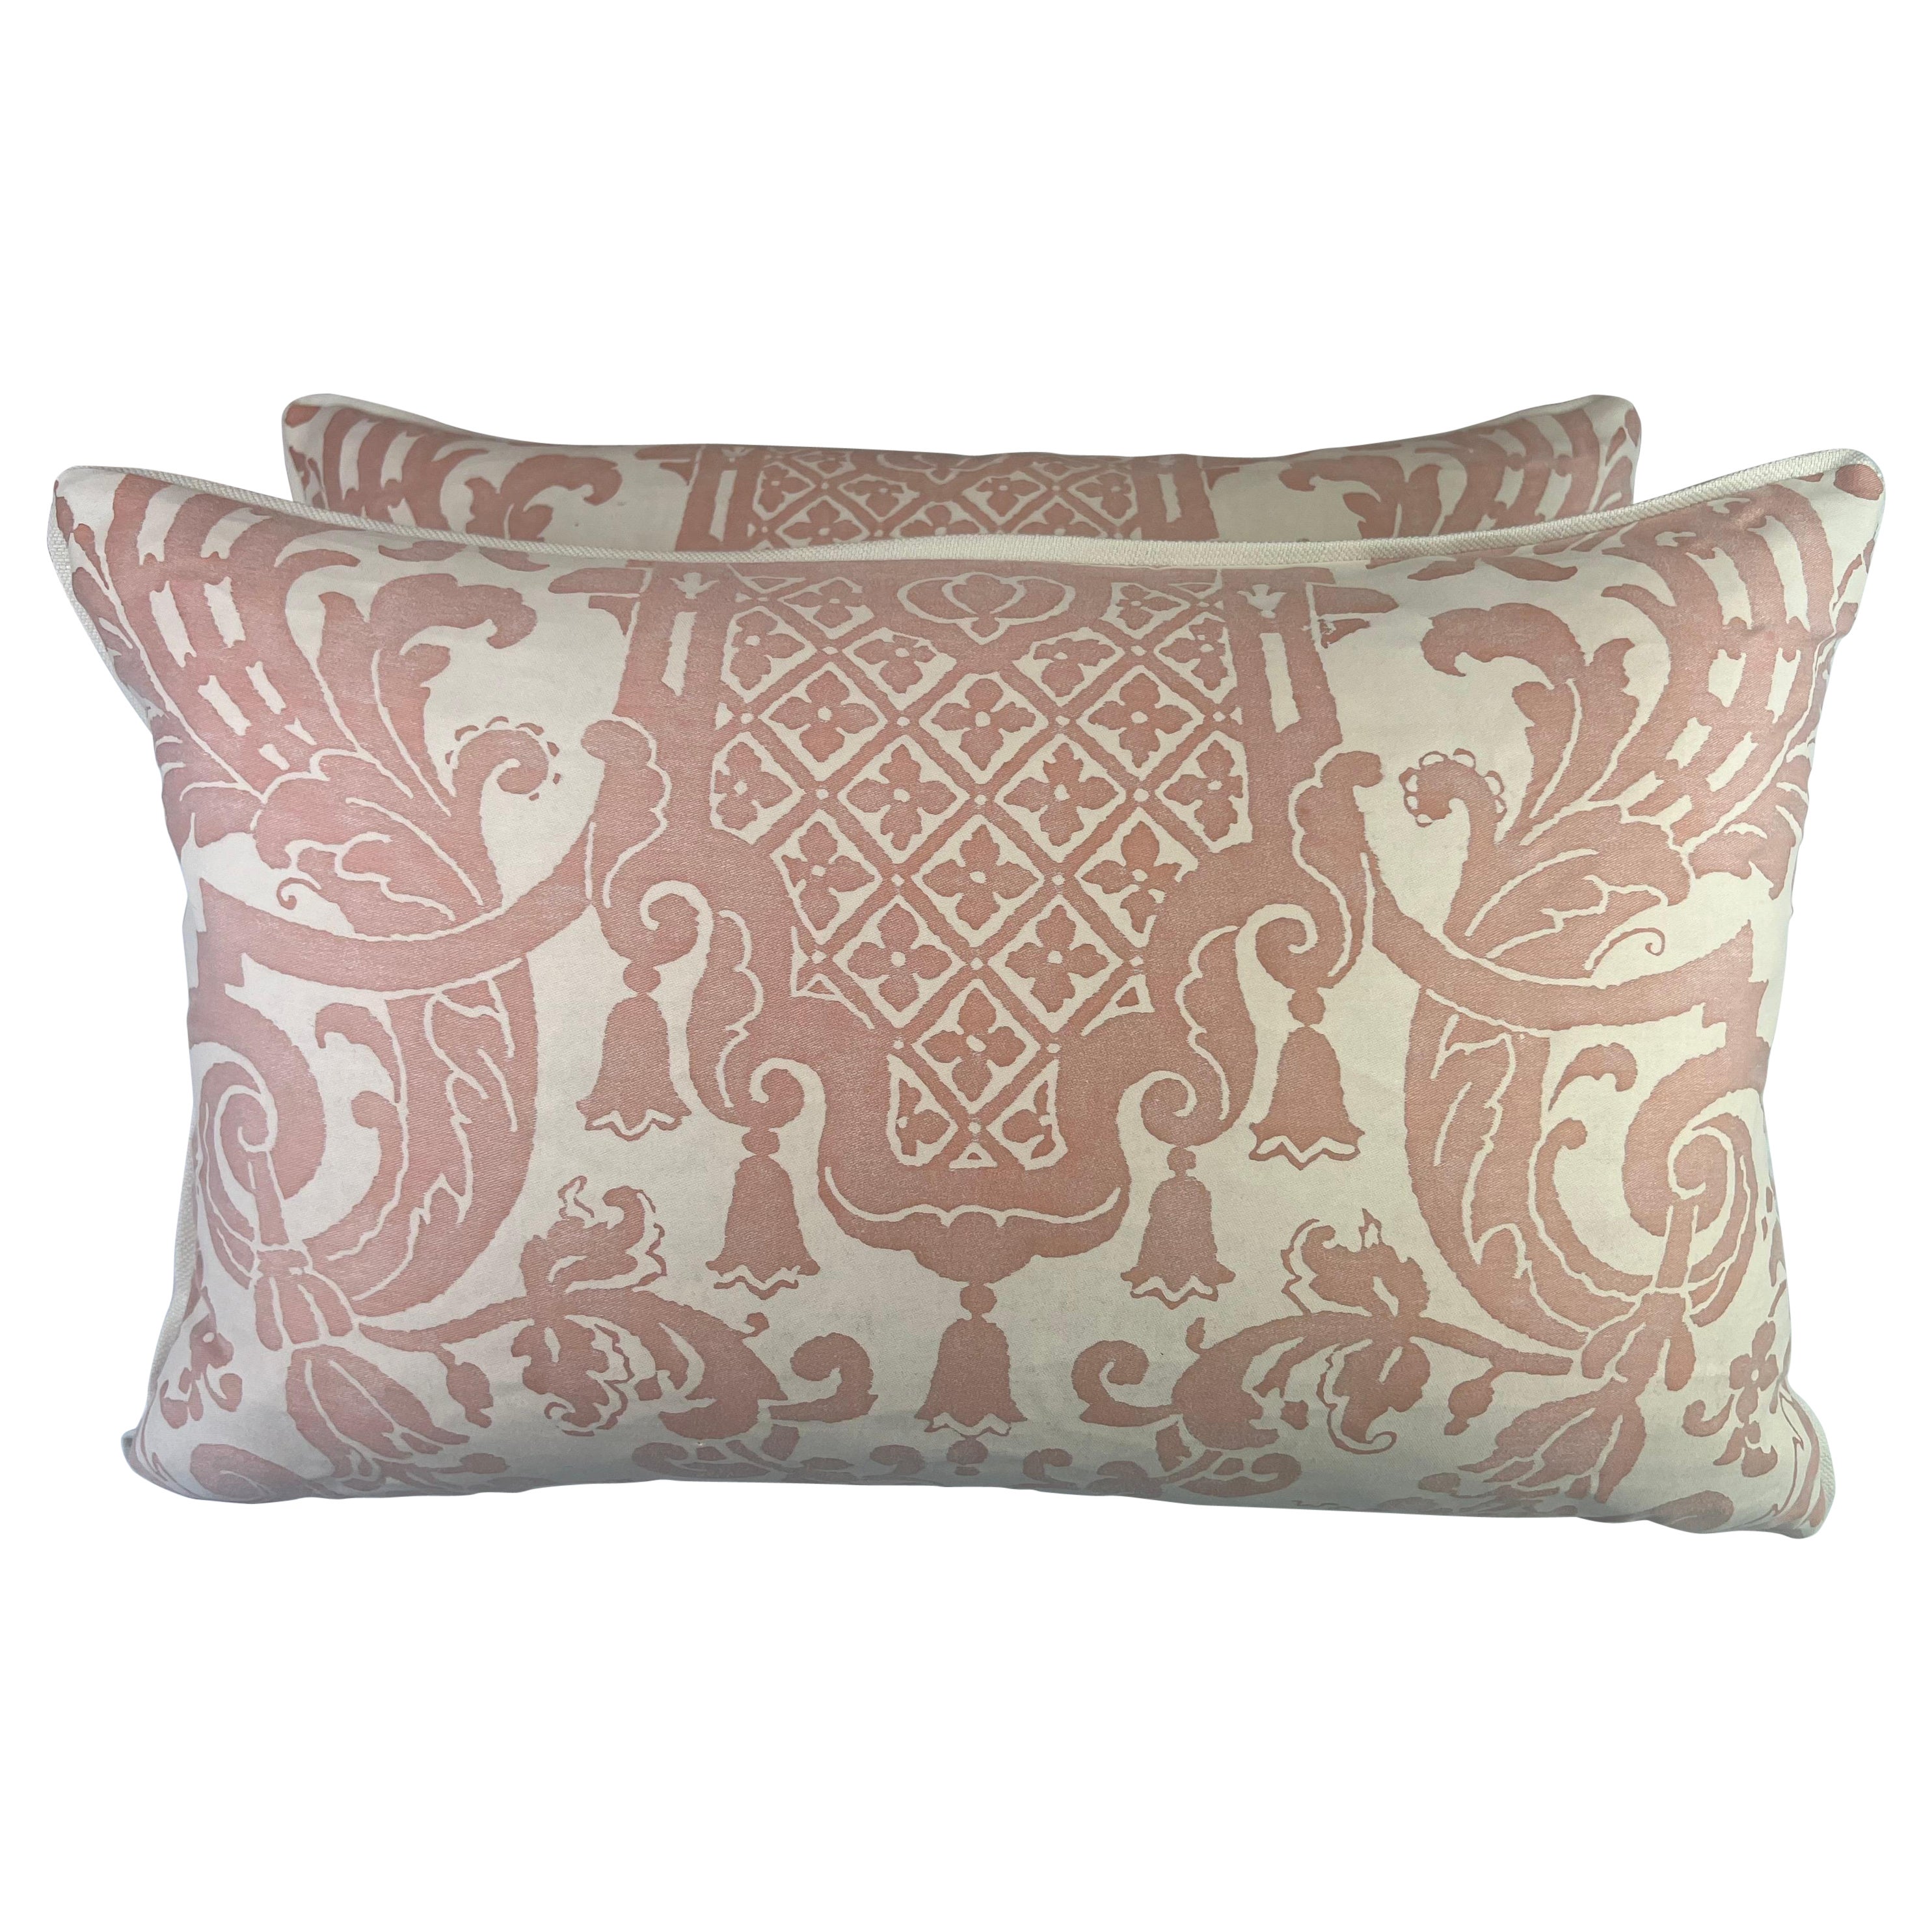 Pair of Carnavalet Patterned Fortuny Pillows